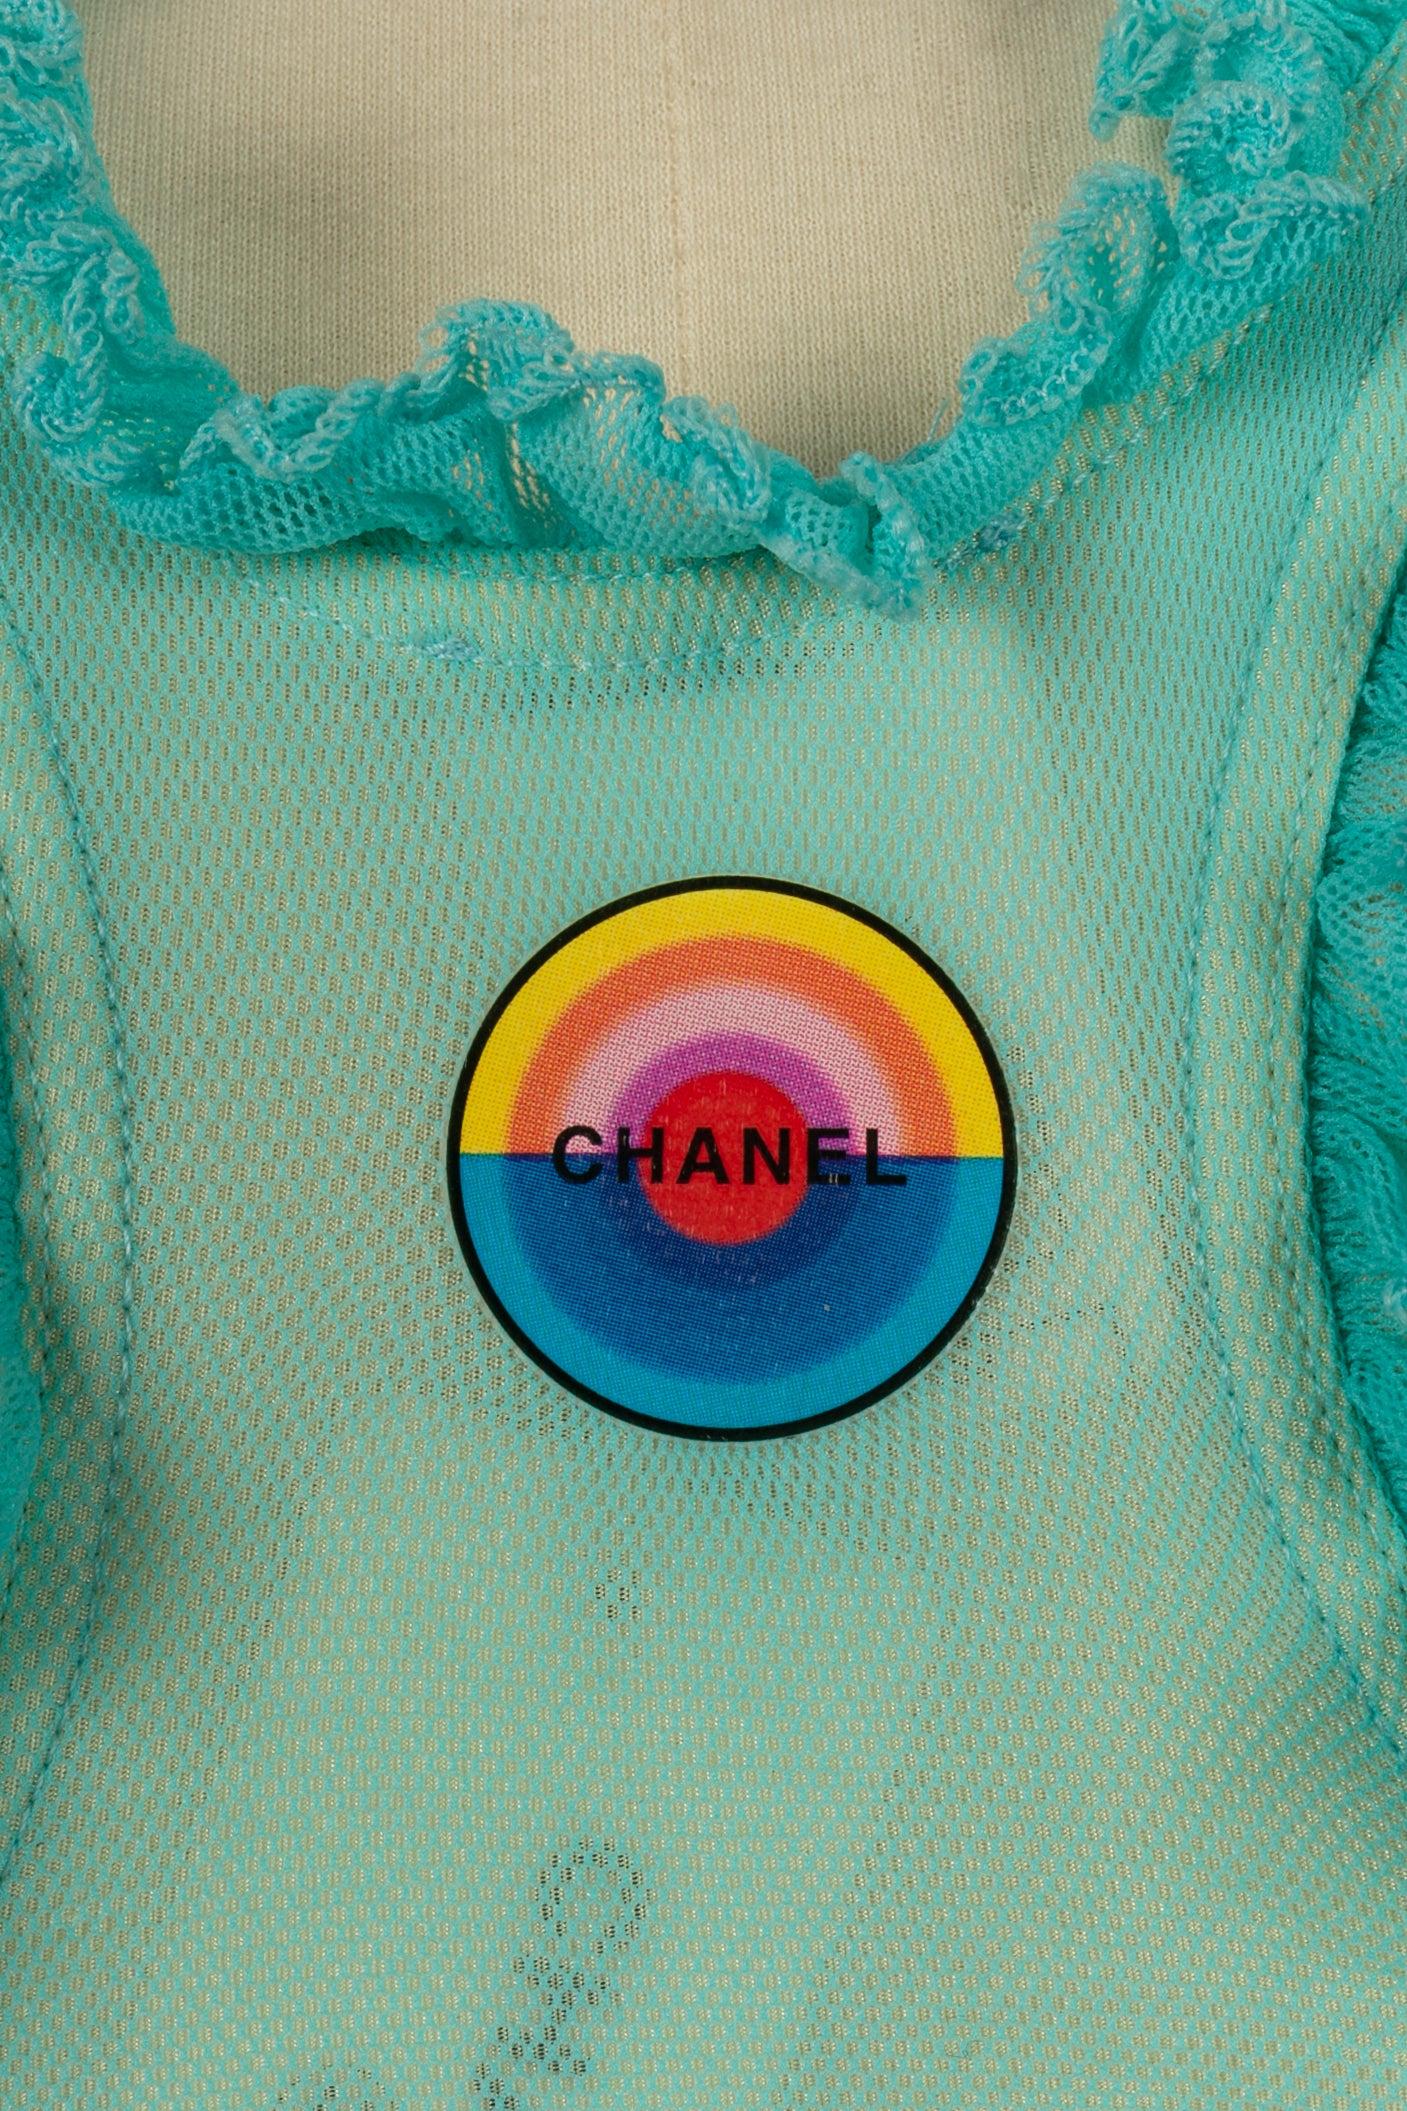 Chanel Turquoise Swimsuit / Bodysuit, 2001 For Sale 1